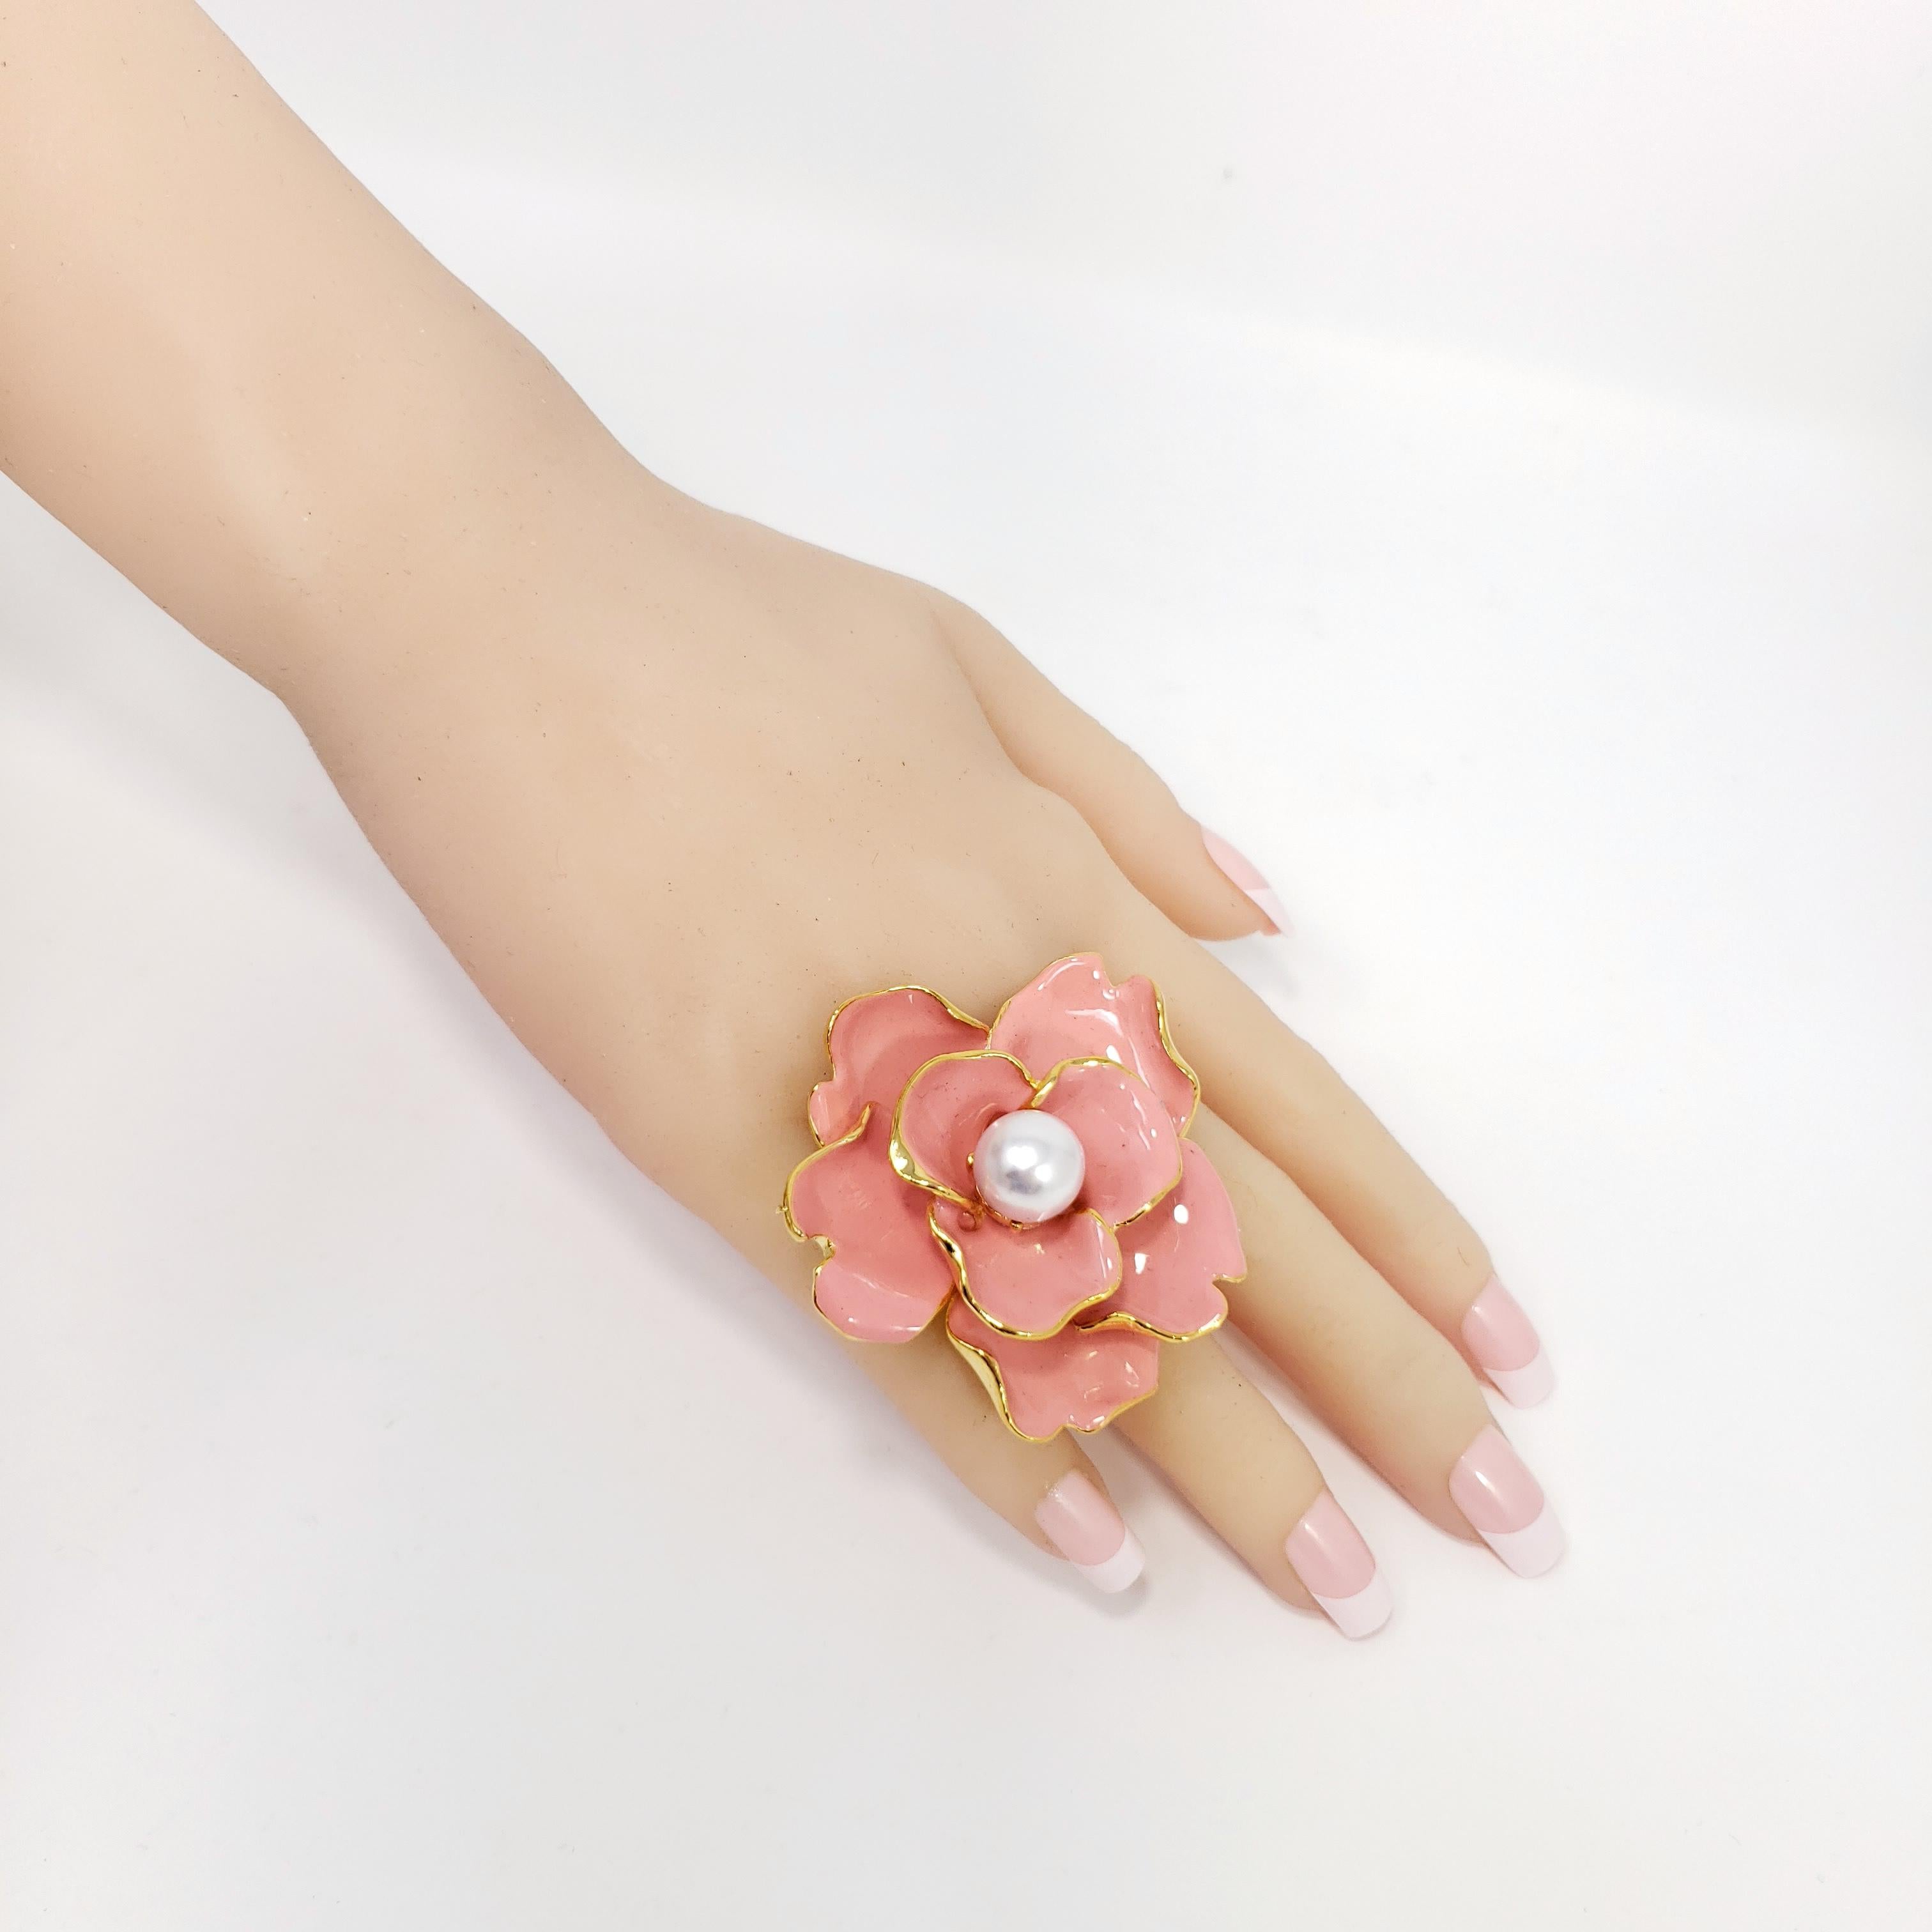 Floral elegance by Kenneth Jay Lane! A cocktail ring featuring a flower, painted in salmon coral enamel and accented with a single faux pearl.

Adjustable sizes 4.5 to 8 US

Gold plated. Made in USA.

Hallmarks: Kenneth Lane